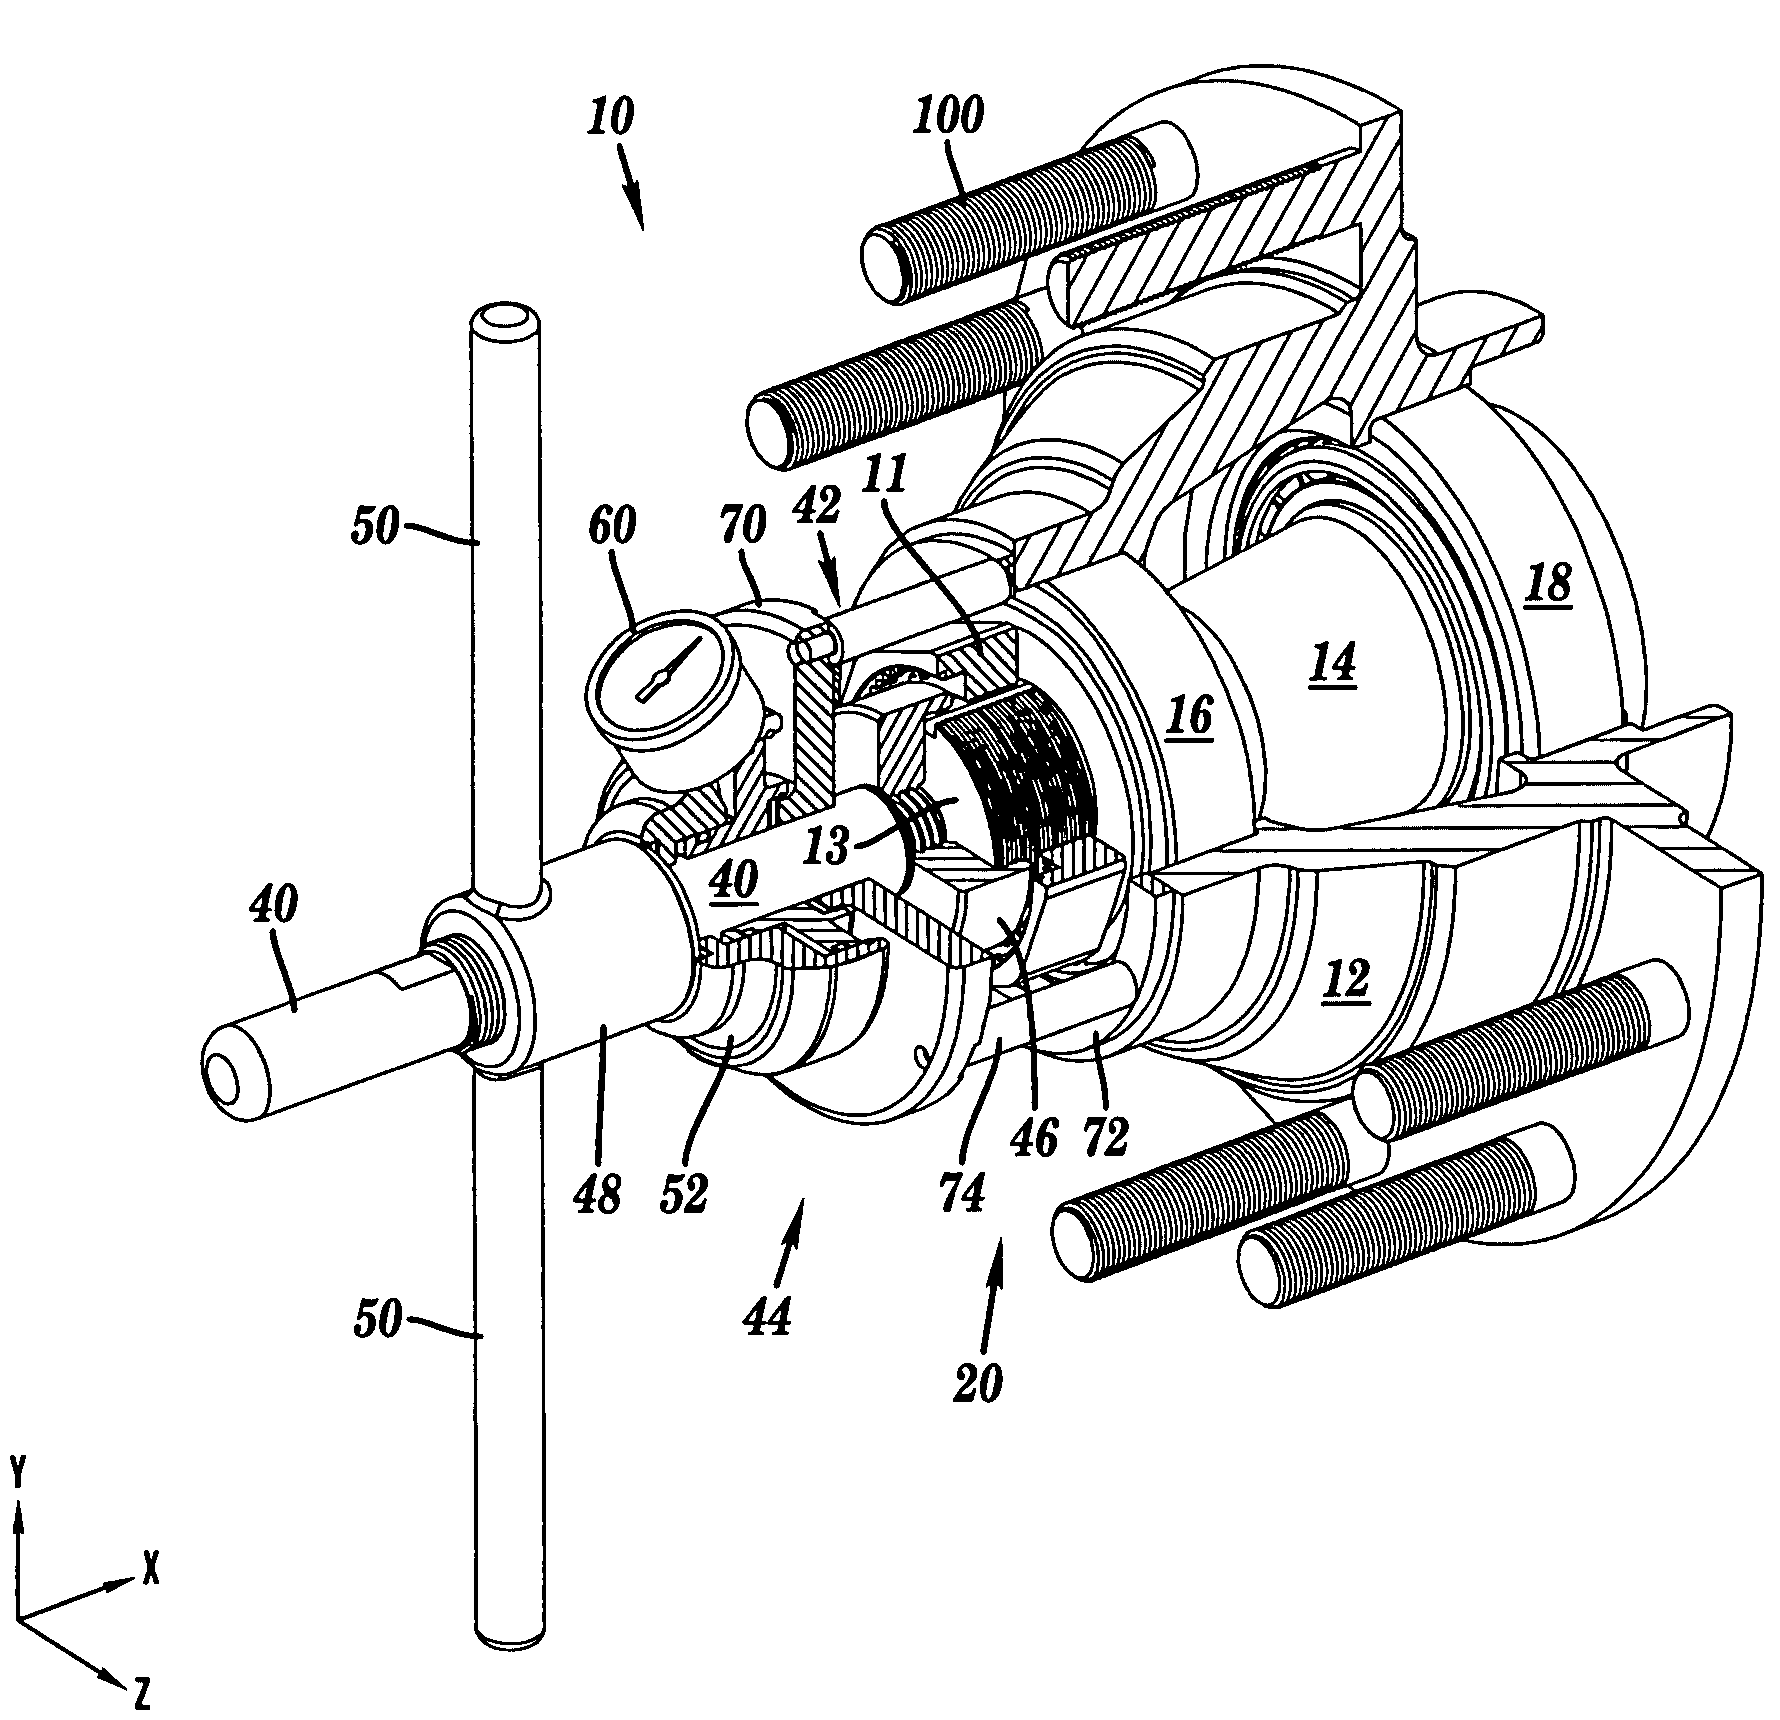 Method and apparatus for preloading a bearing